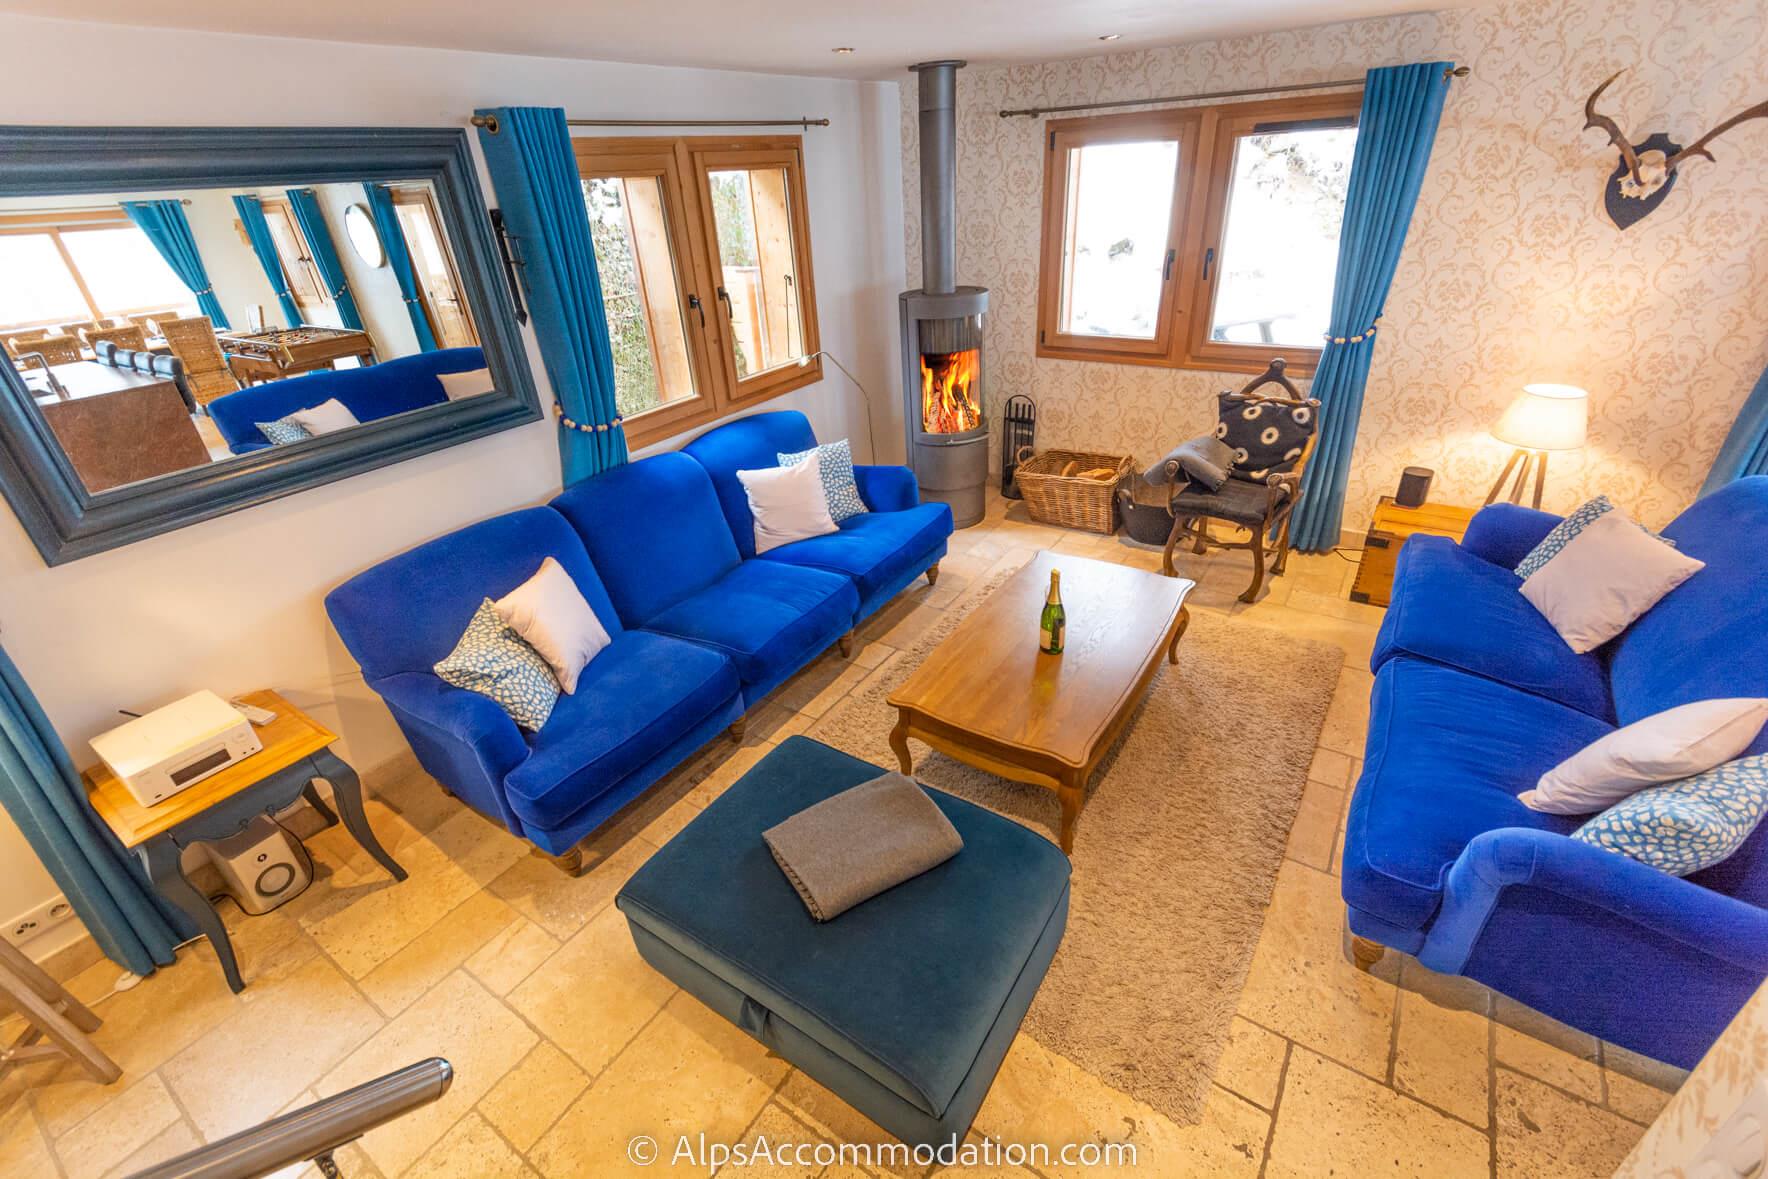 Chalet Falcon Samoëns - Large comfortable sofas perfectly positioned in front of the cosy log fire